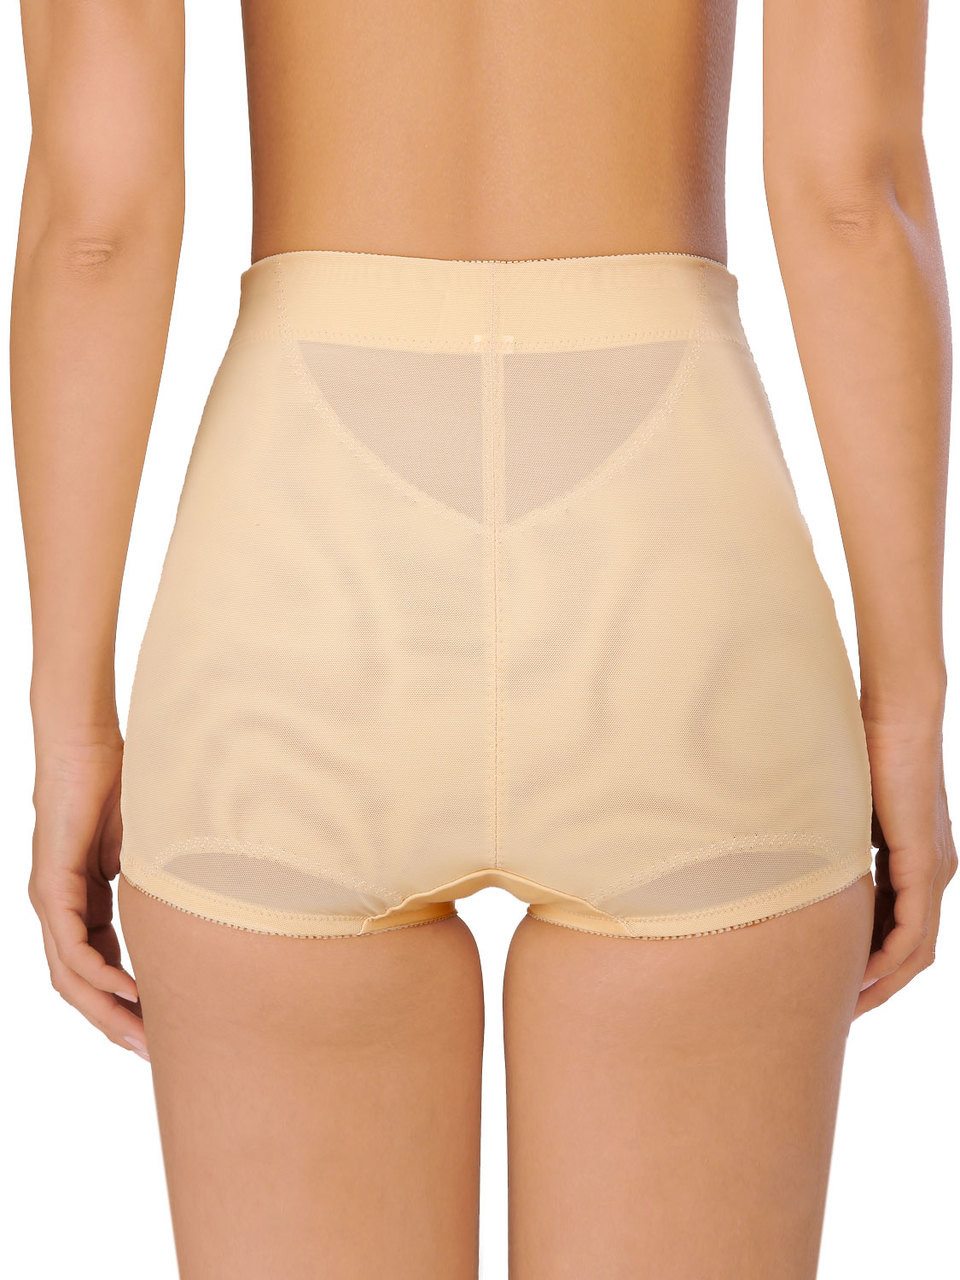 Naturana Firm Control Open Girdle With Suspenders-XXL